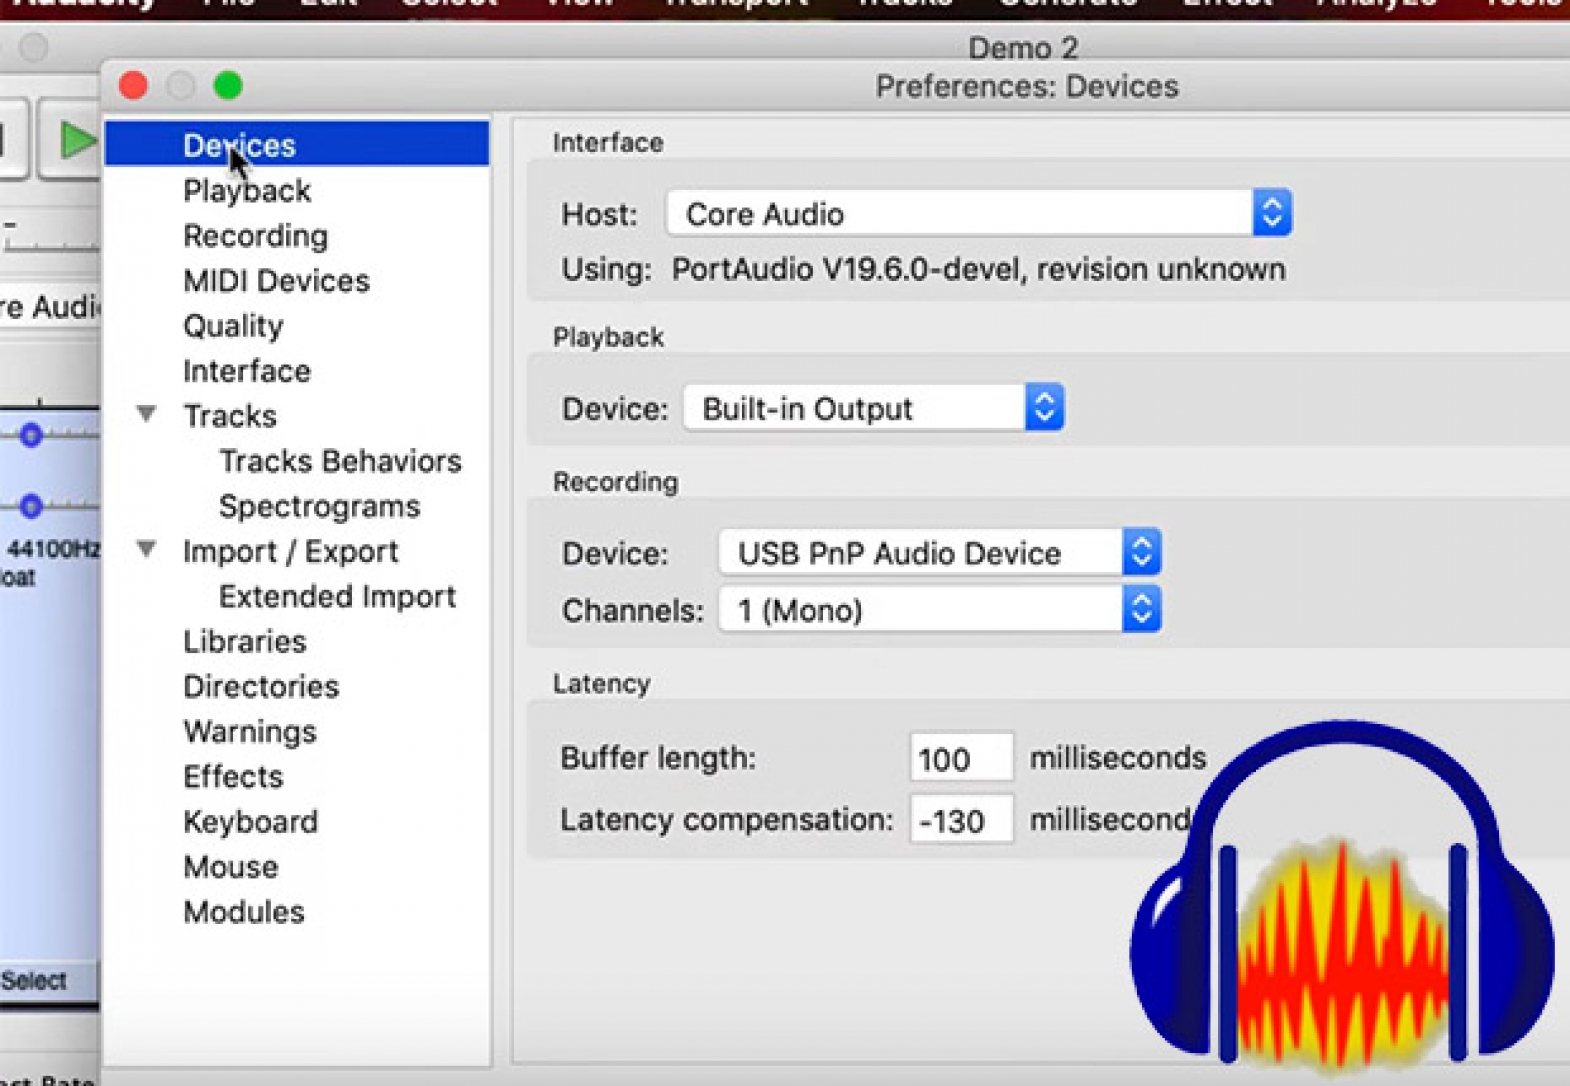 Screen shot of audacity preferences to set recording device